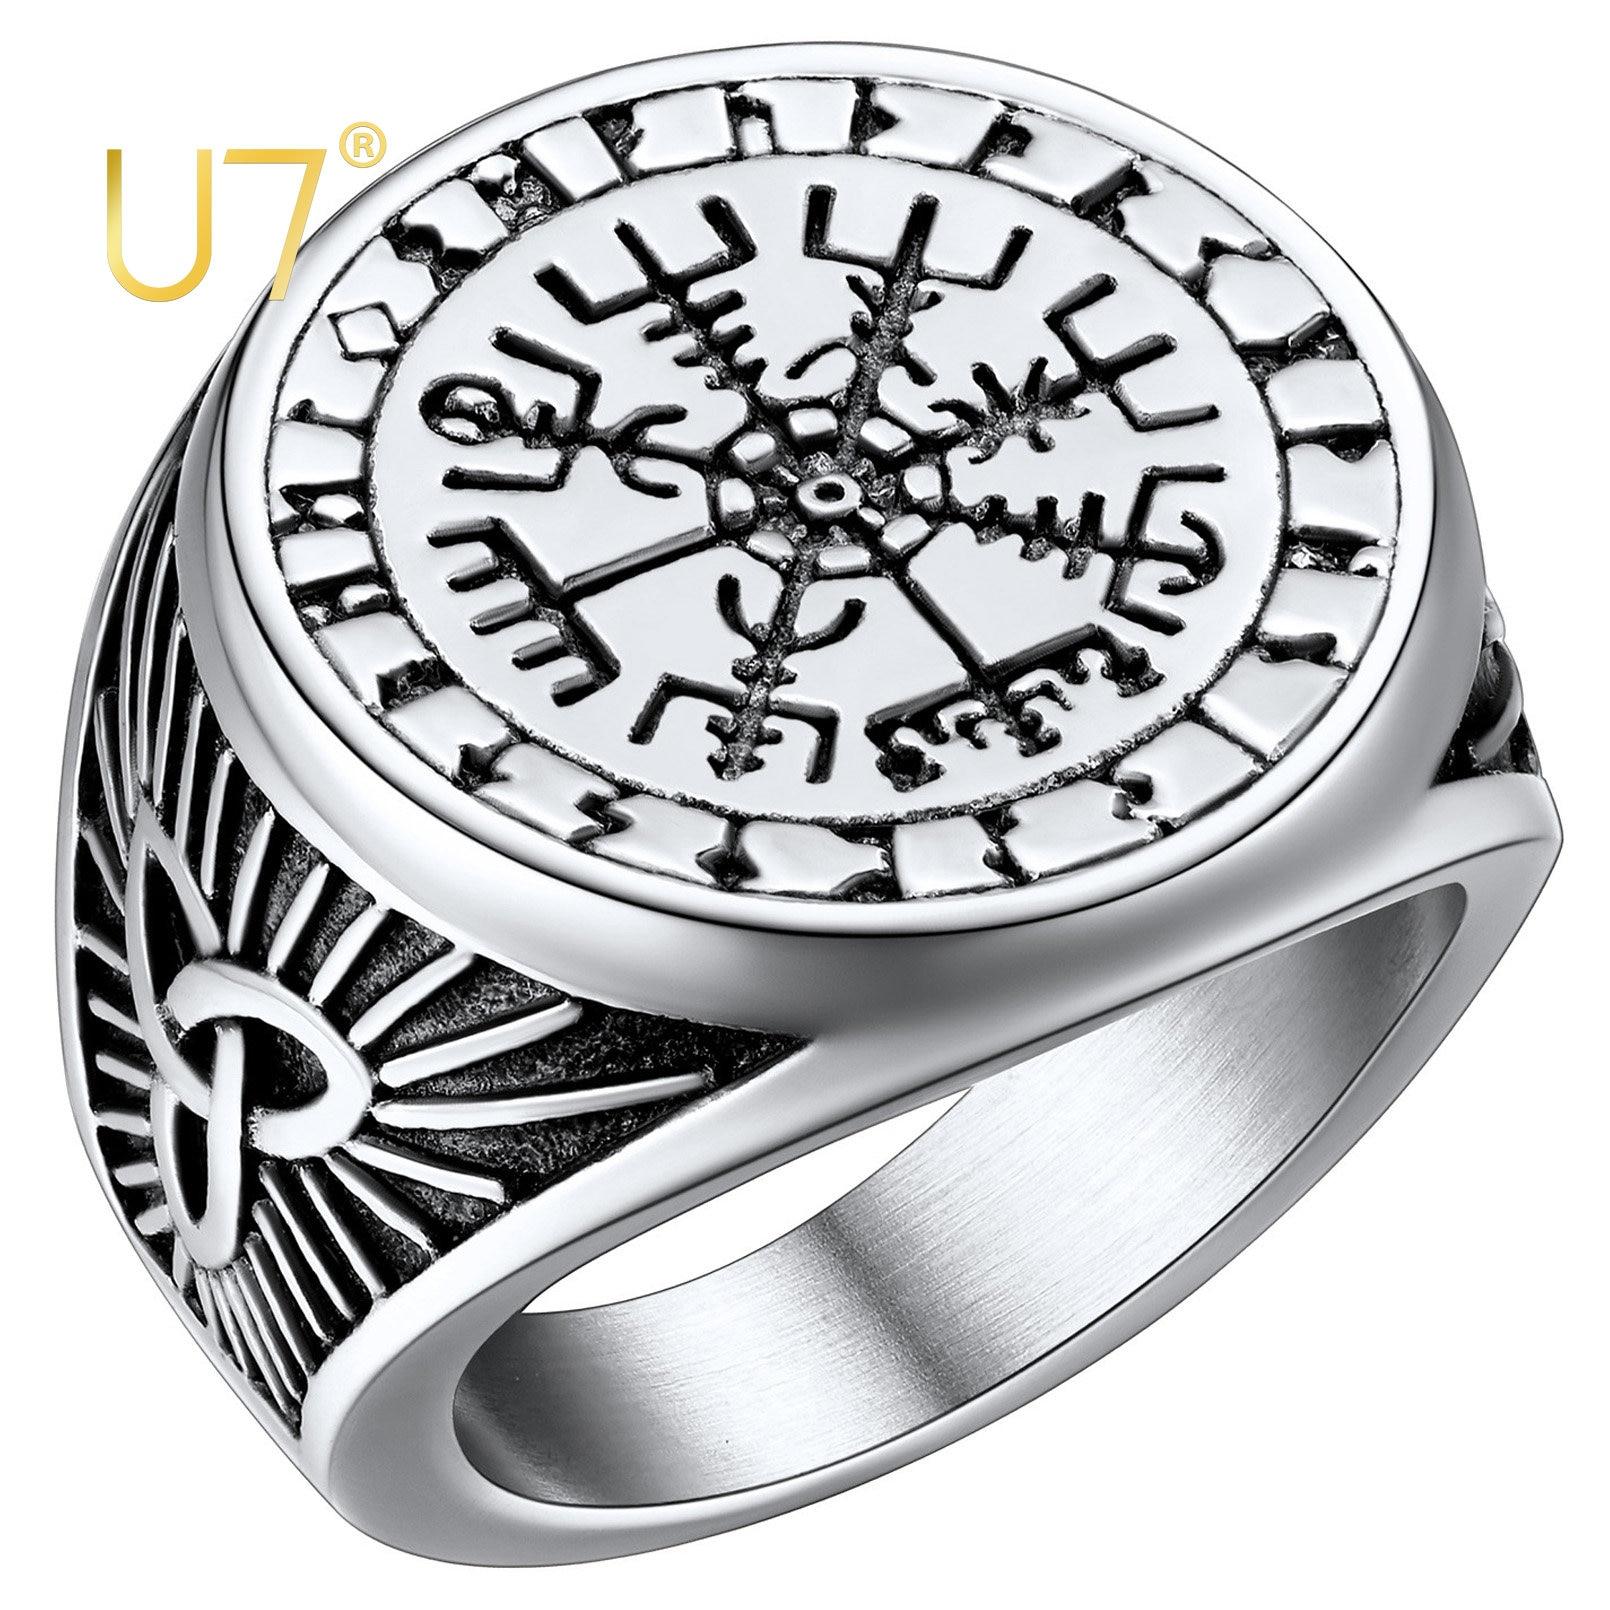 Top Quality Signet Rings Viking Jewellery Runic Compass Vegvisir Thumb Ring Stainless Steel Nordic Rings Gift for Halloween